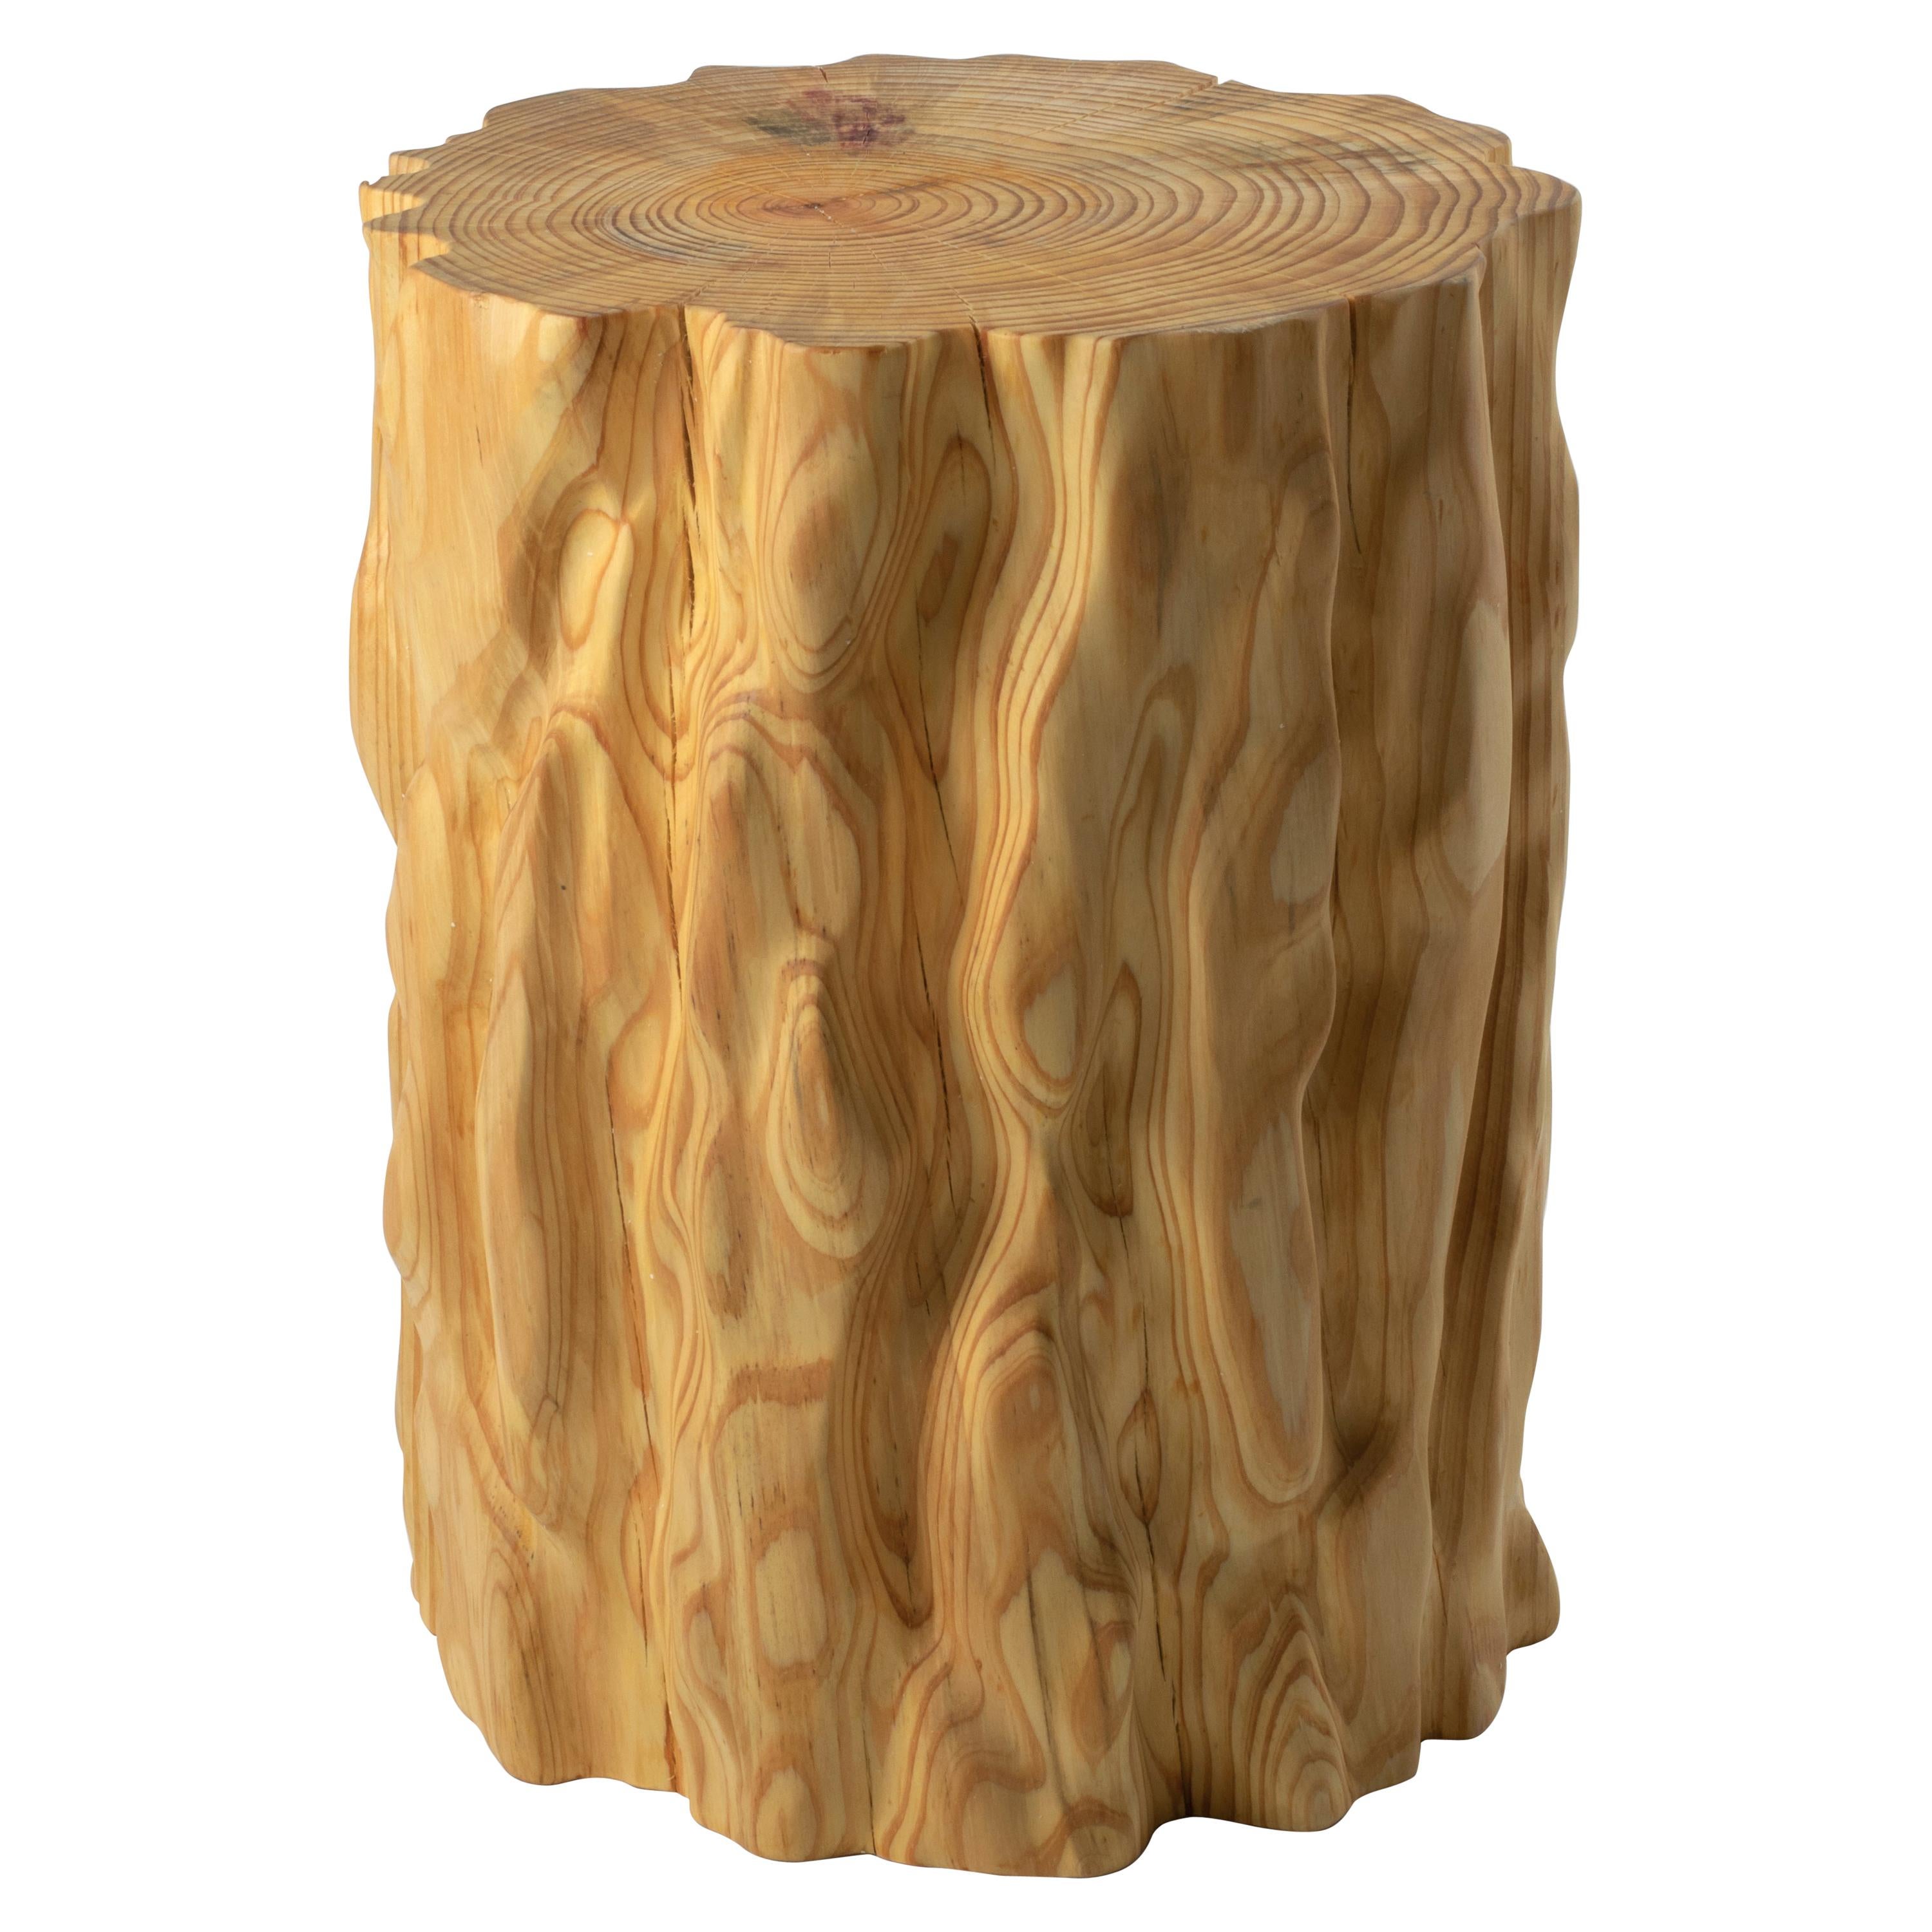 Bark Scale Stool #I by Timbur, Represented by Tuleste Factory For Sale